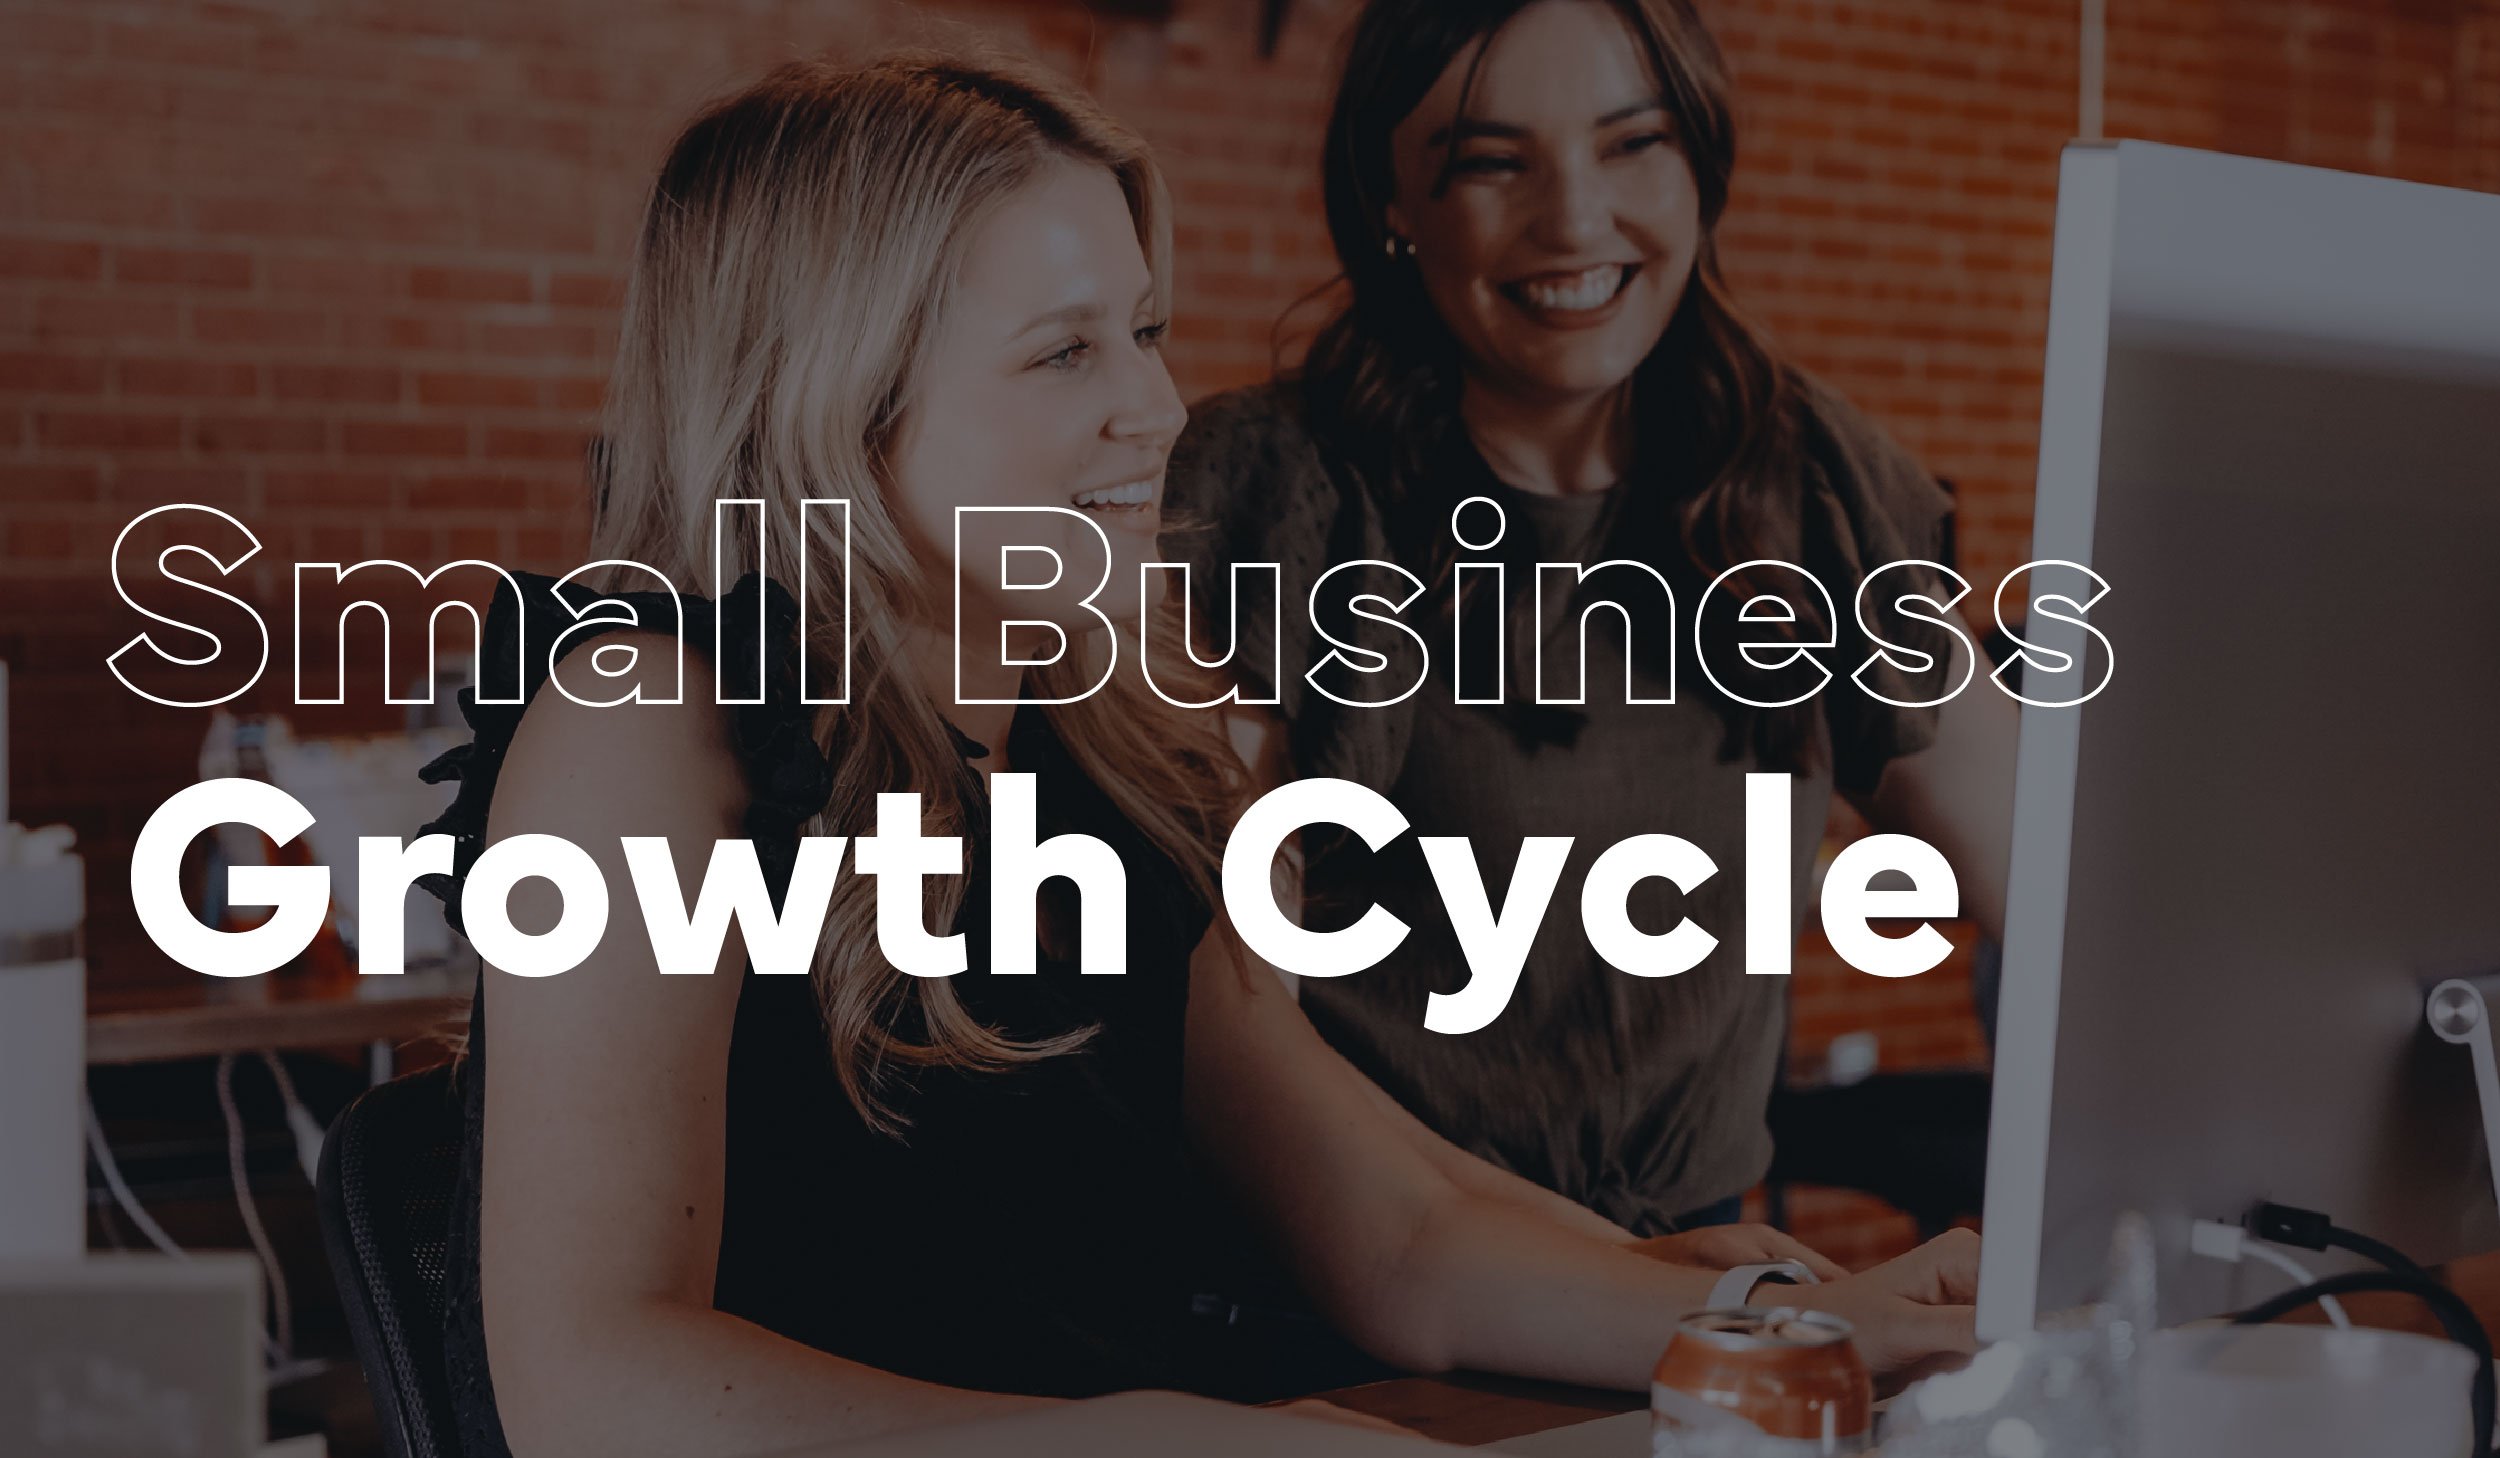 Small Business Growth Cycle